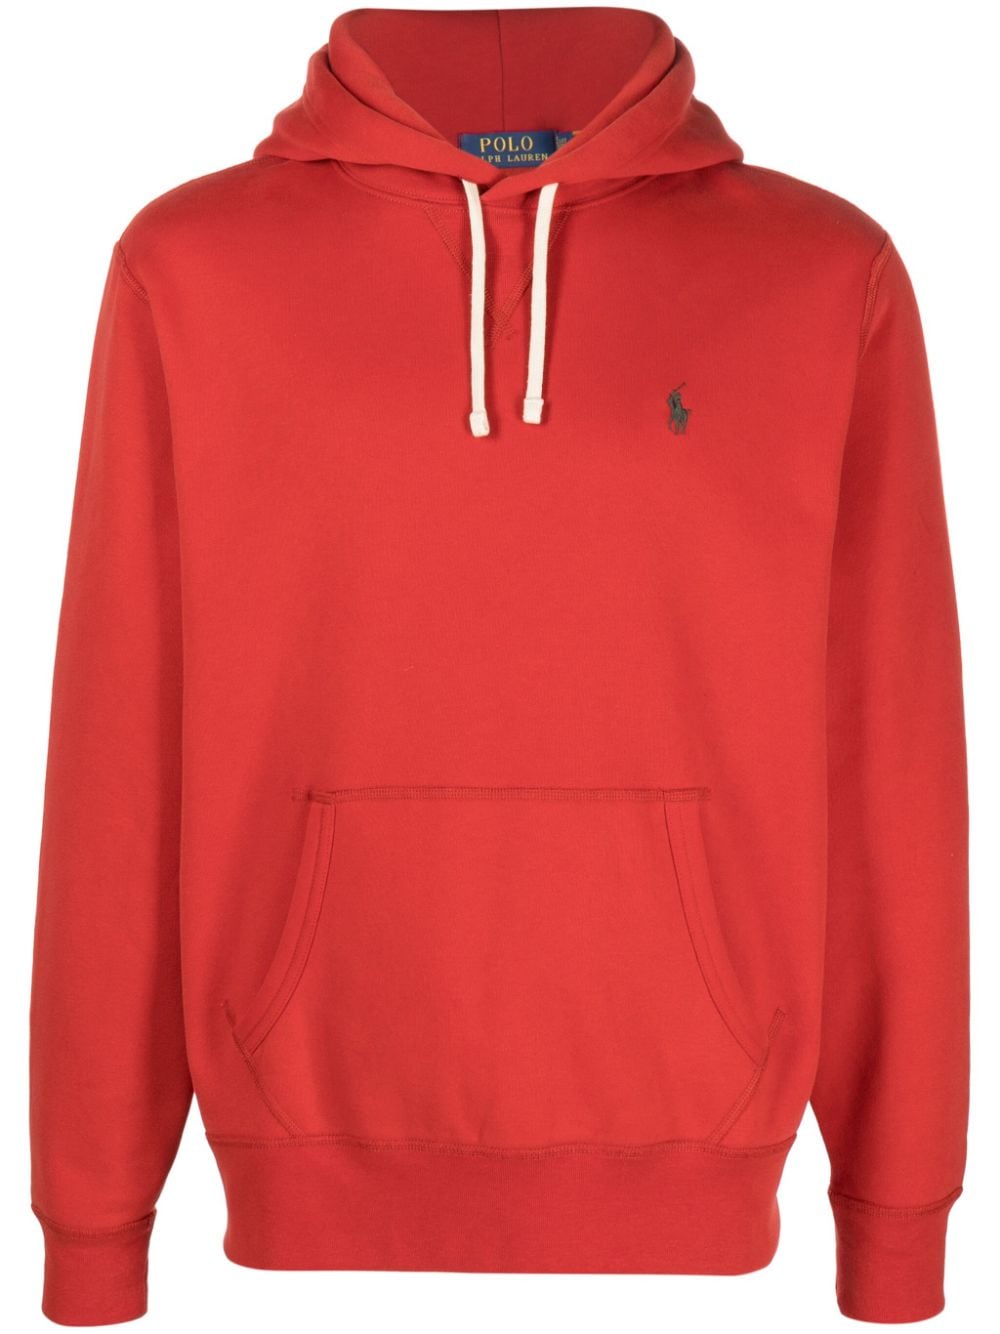 POLO RALPH LAUREN POLO PONY-EMBROIDERED JERSEY HOODIE